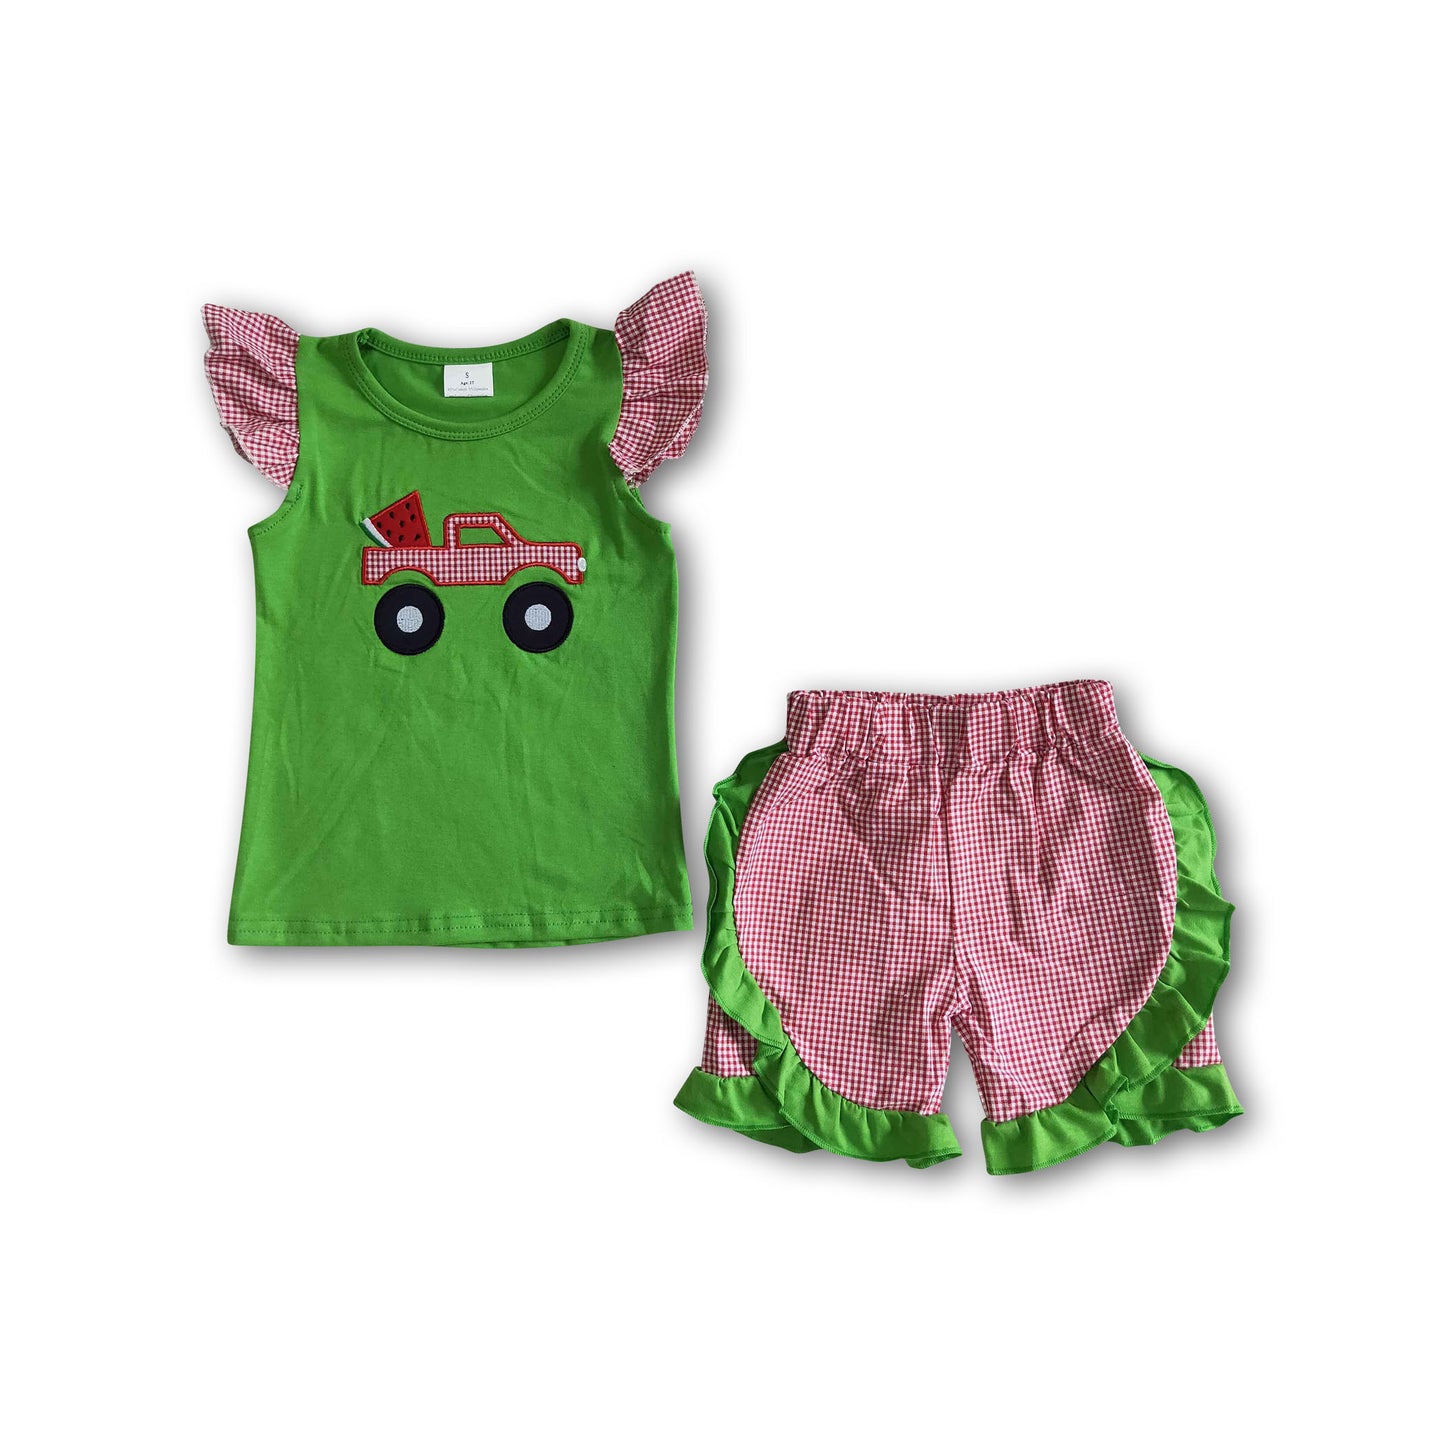 Watermelon truck embroidery girls summer outfits